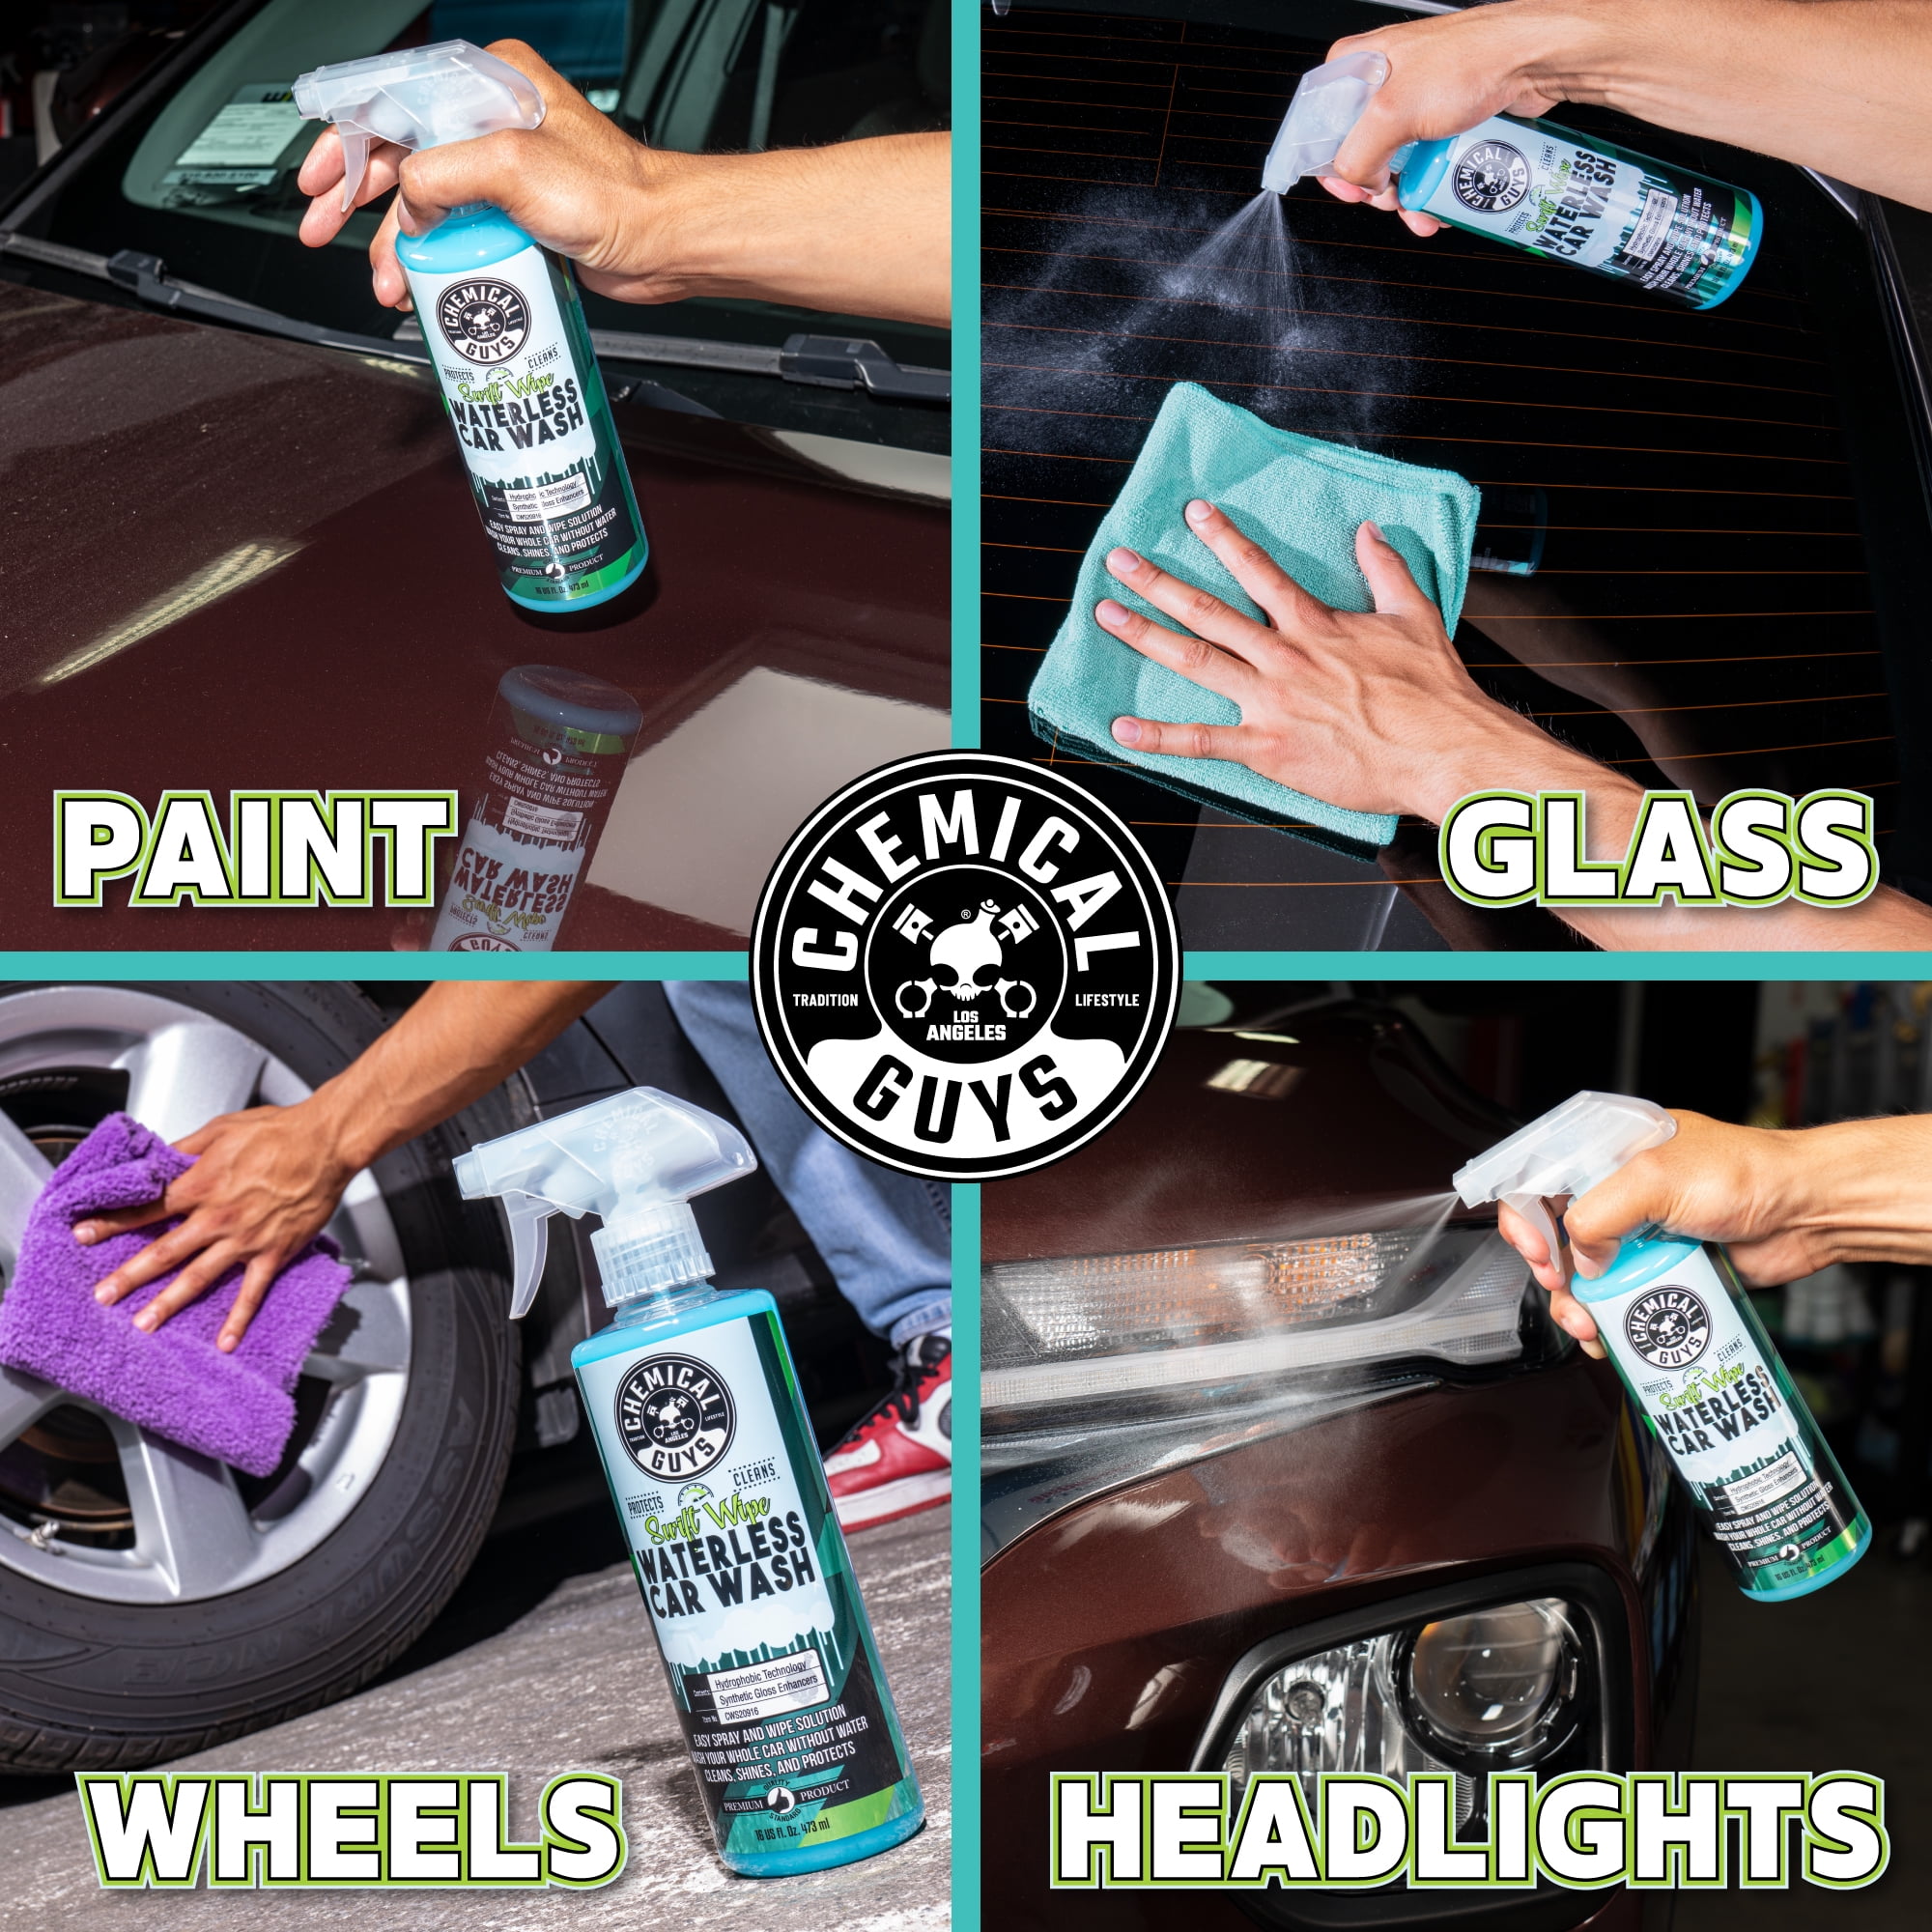 Chemical Guys Swift Wipe Complete Waterless Car Wash Eay Spray and Wipe  Formula 16oz